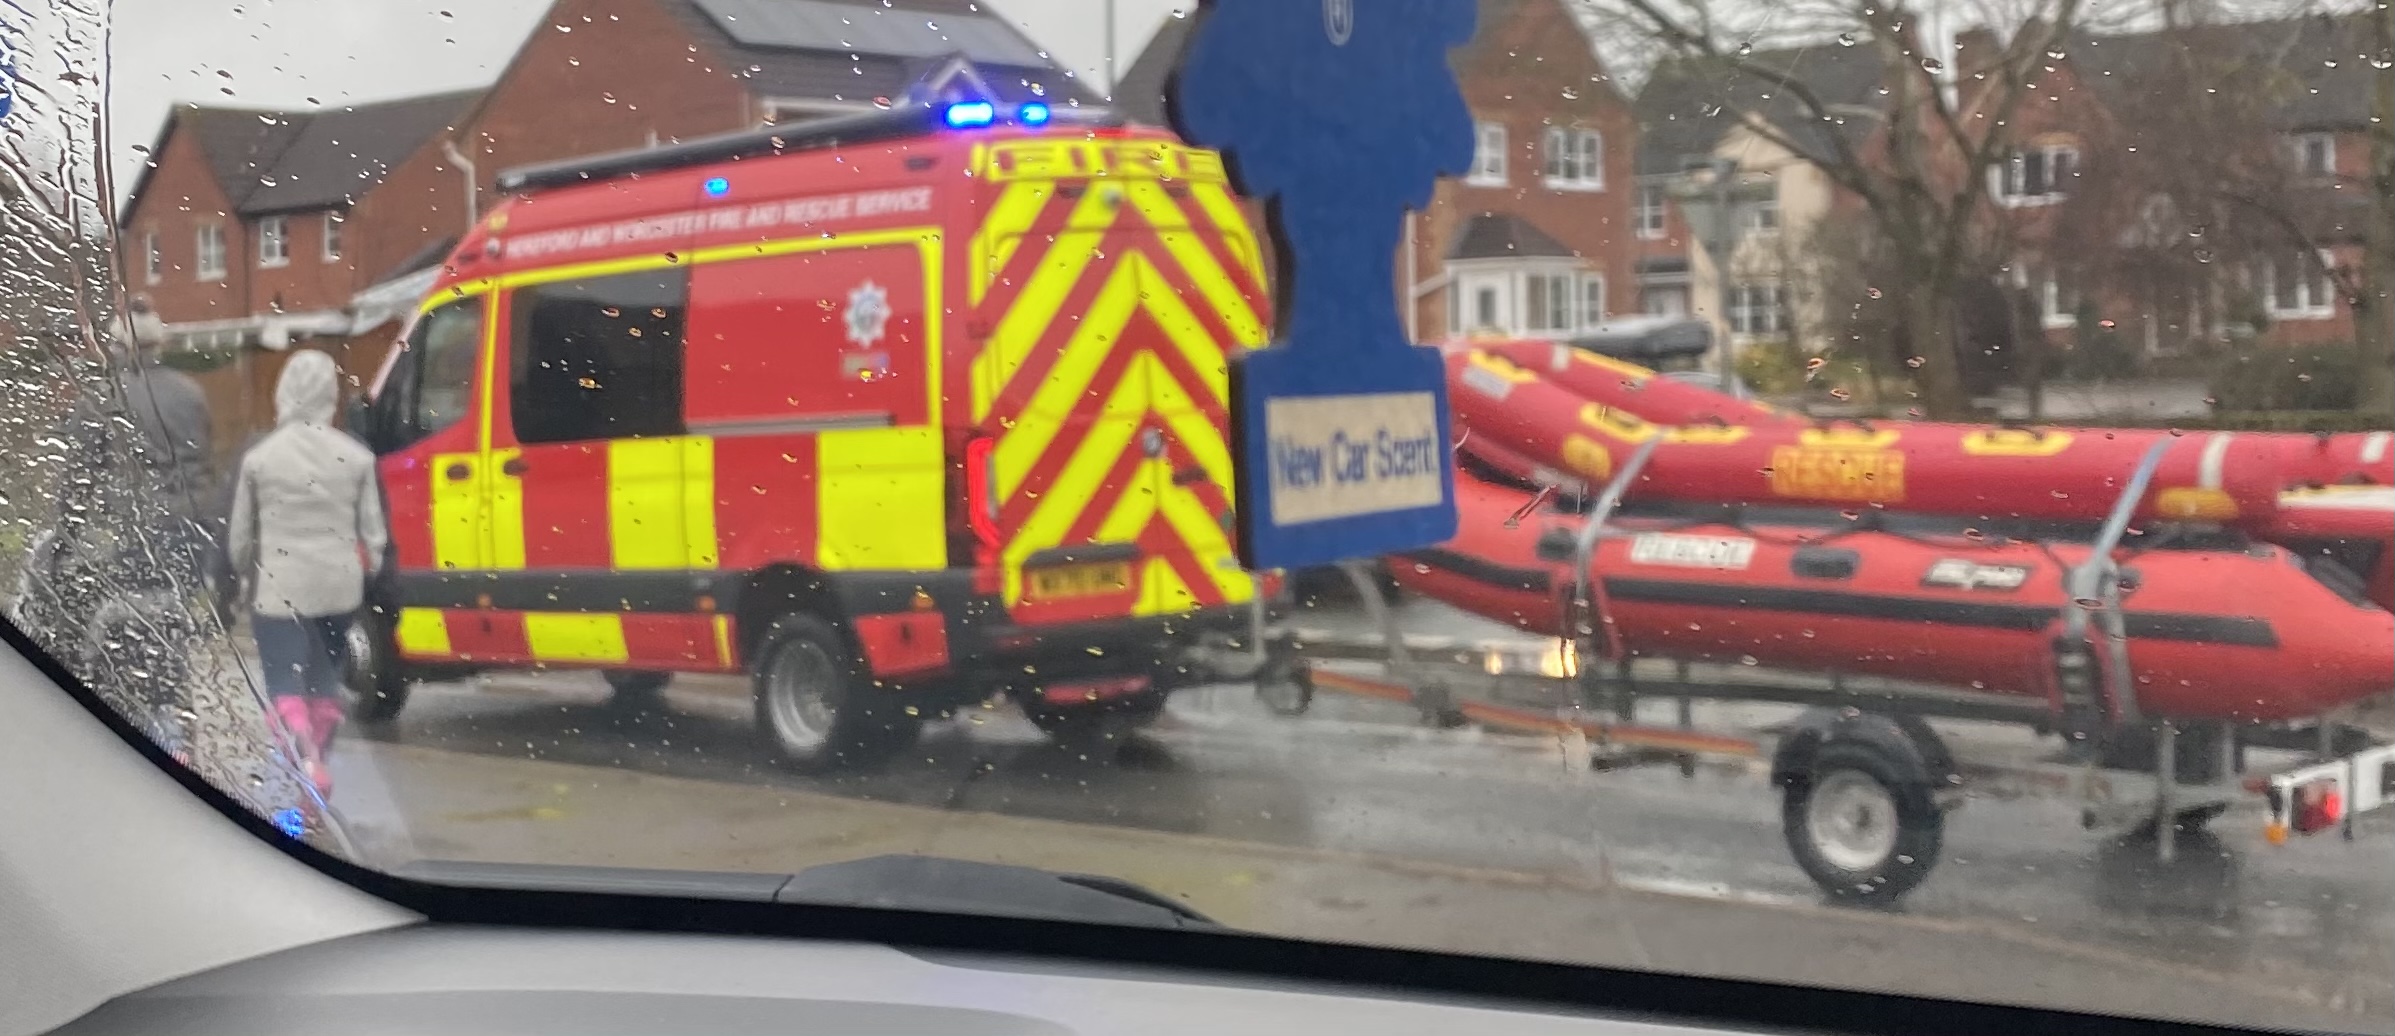 FLOODING | Emergency services called to car stuck in floodwater